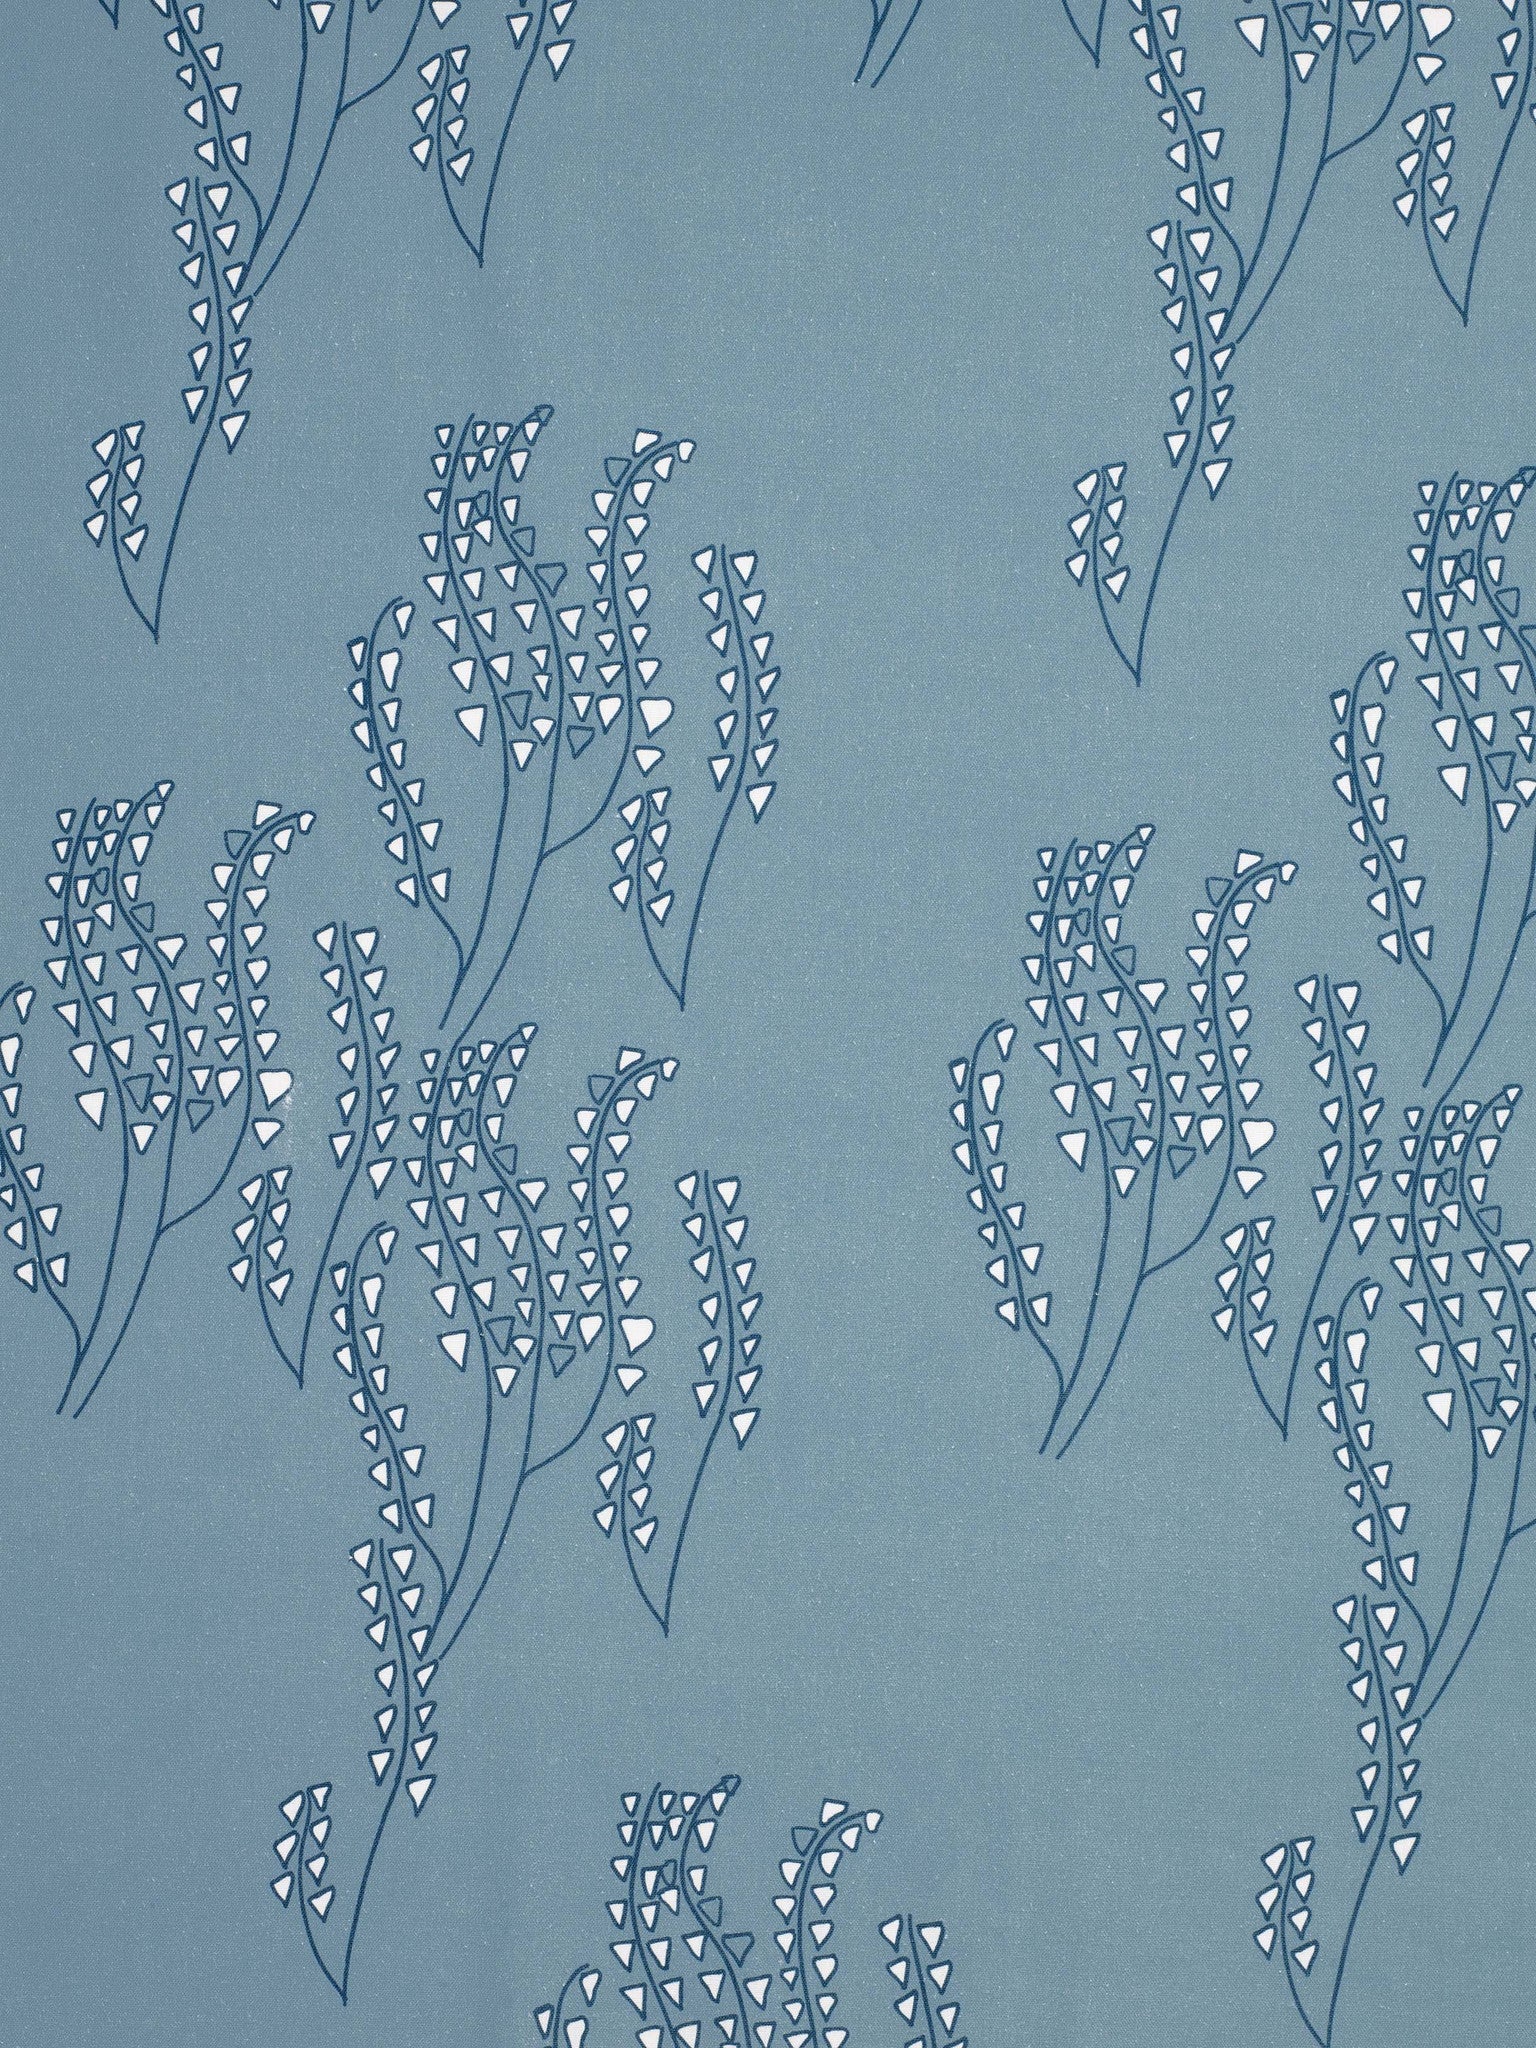 Yuma Graphic Grass Pattern Linen Cotton Canvas Home Decor Interiors Fabric by the meter or yard for curtain, blinds or upholstery - Light Chambray Blue - ships from Canada (USA)